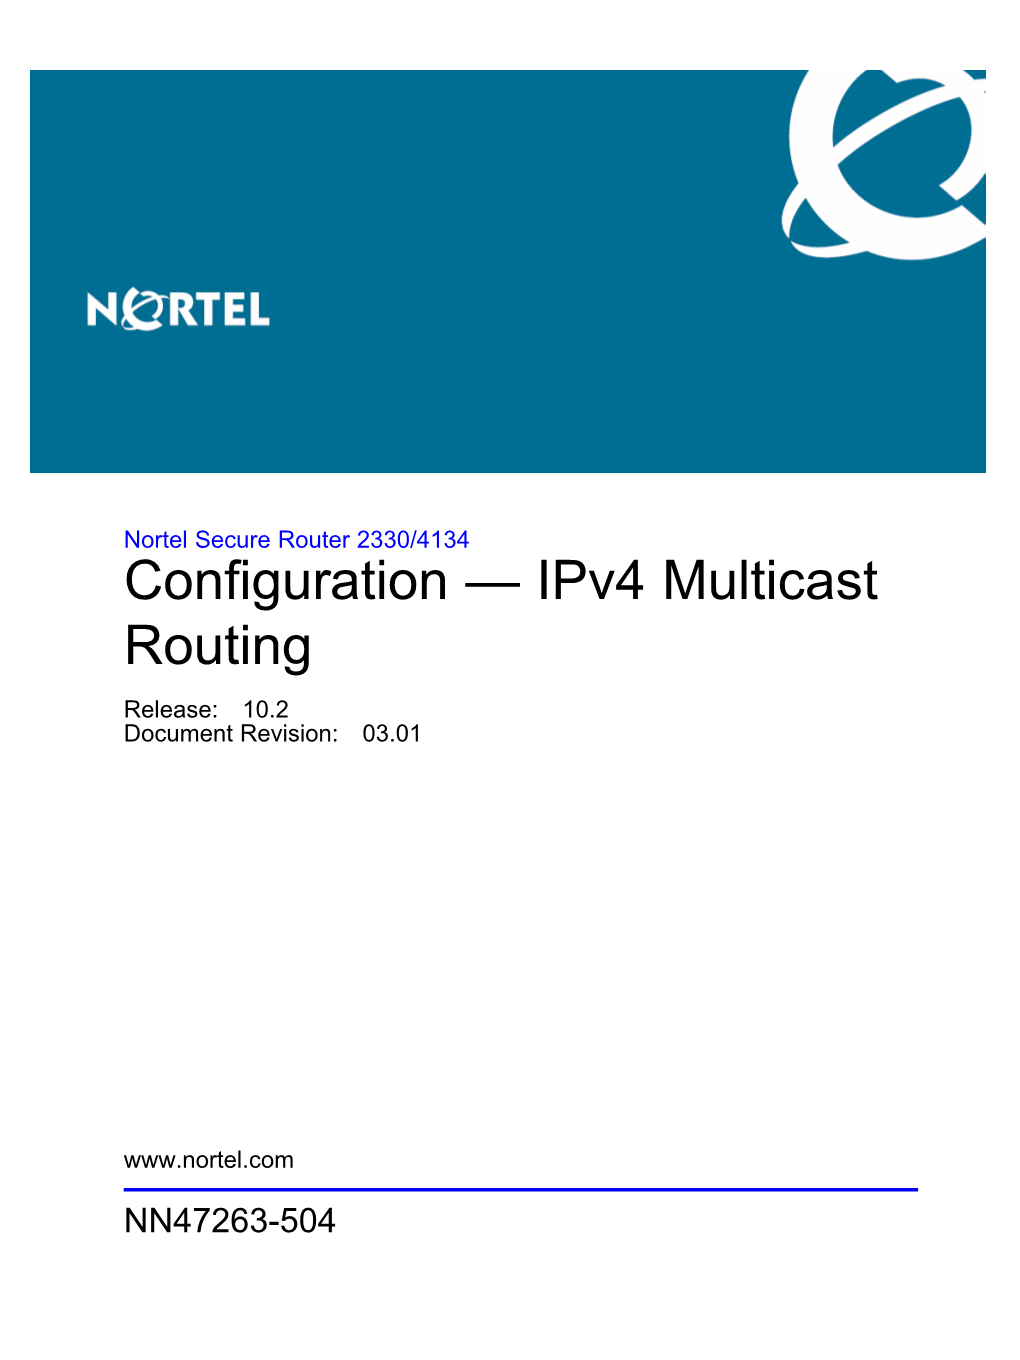 Configuration — Ipv4 Multicast Routing NN47263-504 03.01 7 September 2009